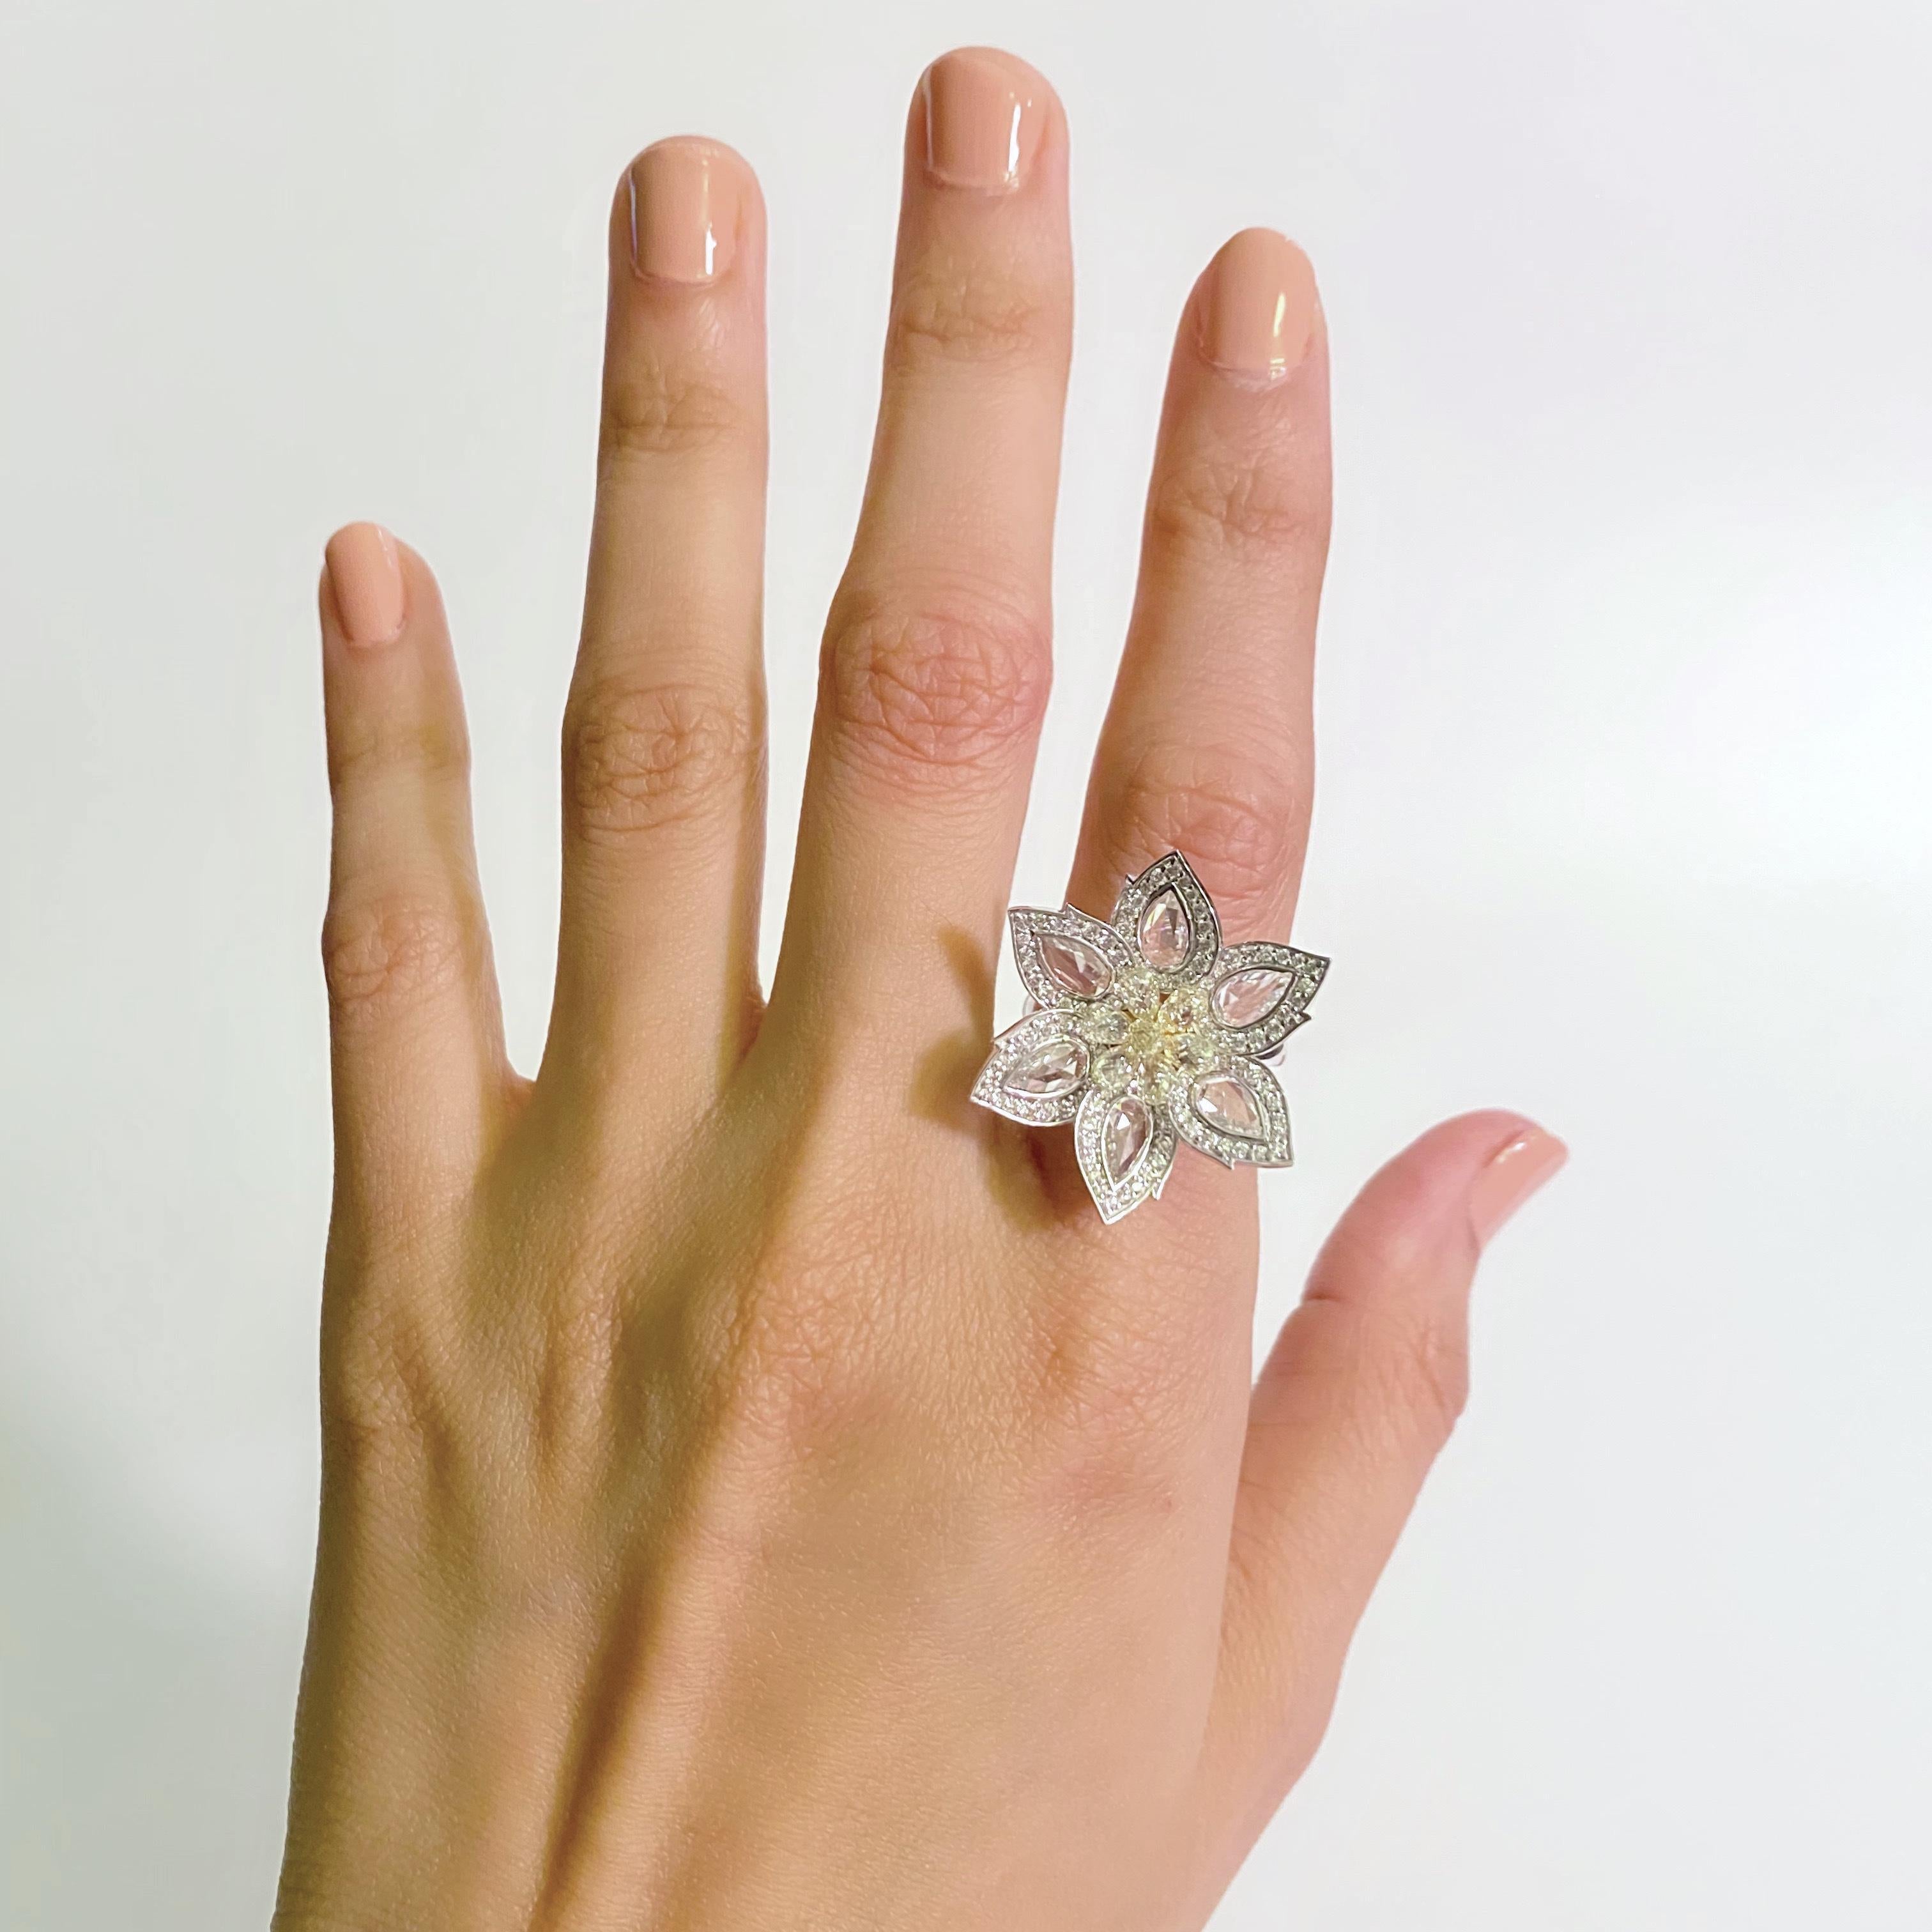 1.92 Carat Center Diamond and 1.34 Carat Briolette Diamond 18K Ring - The Daisy In New Condition For Sale In New York, NY